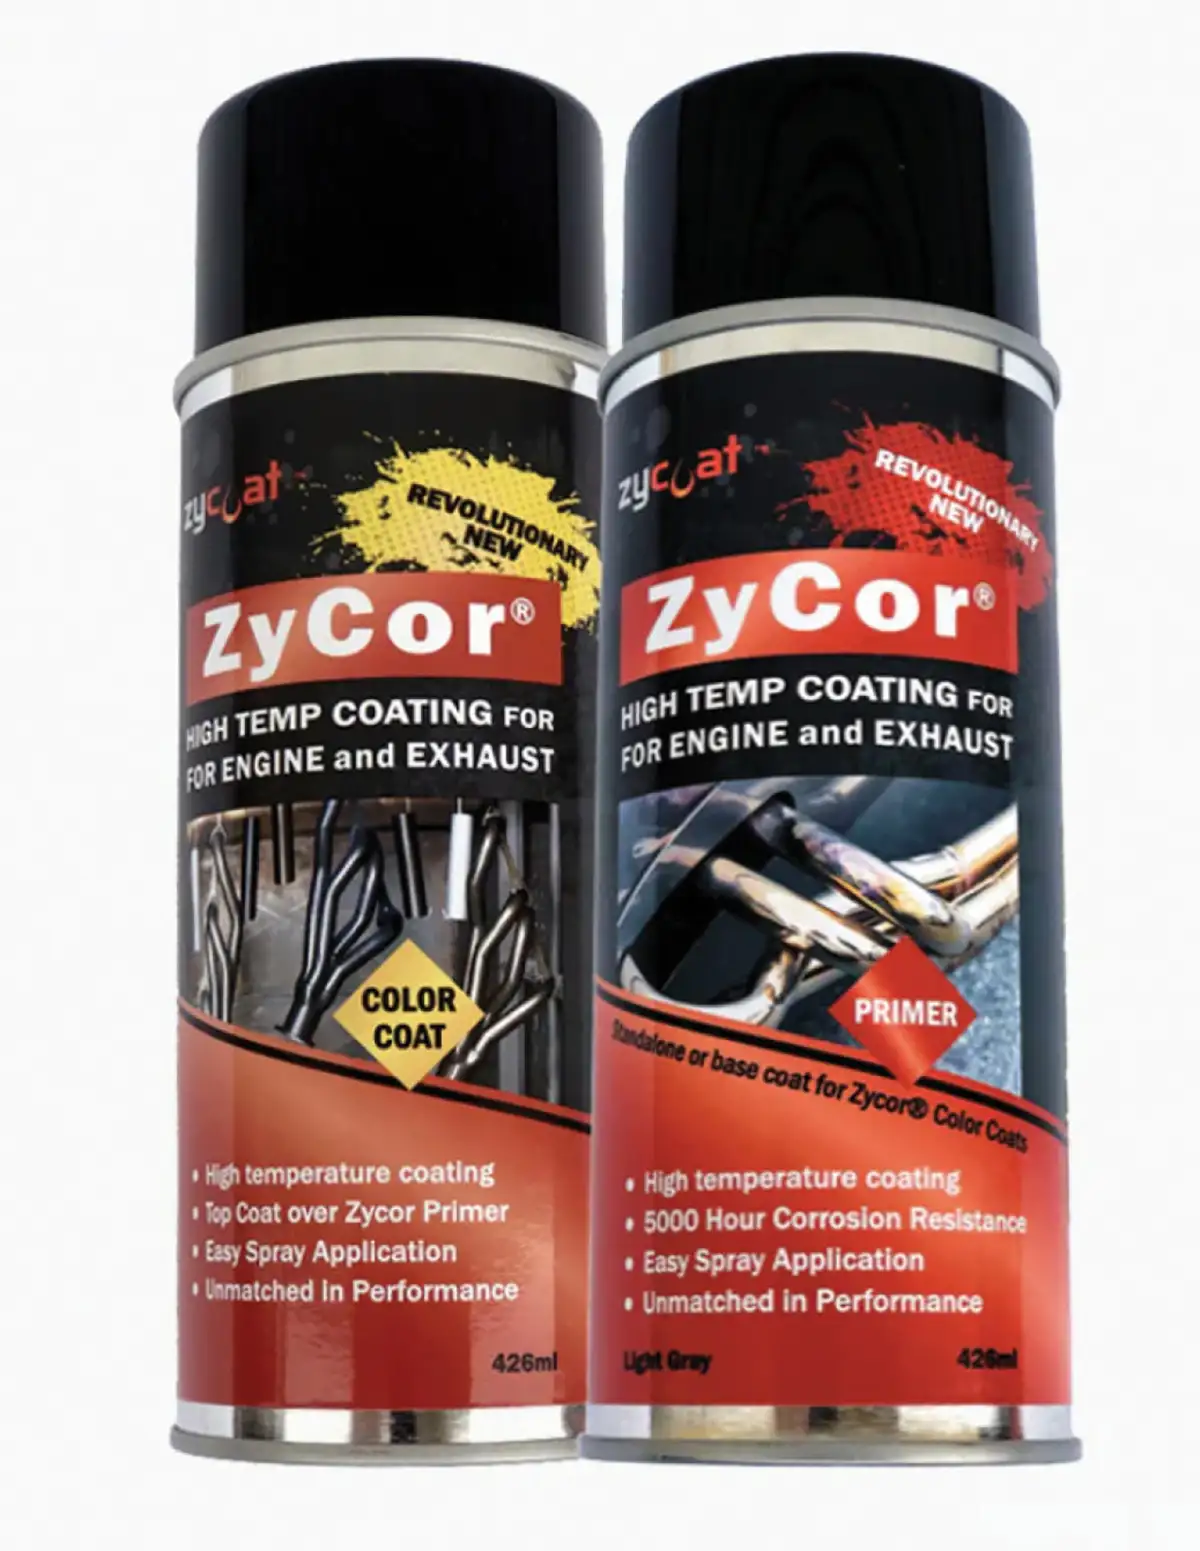 Some products are available in spray cans for DIYers who may not have paint spraying equipment.